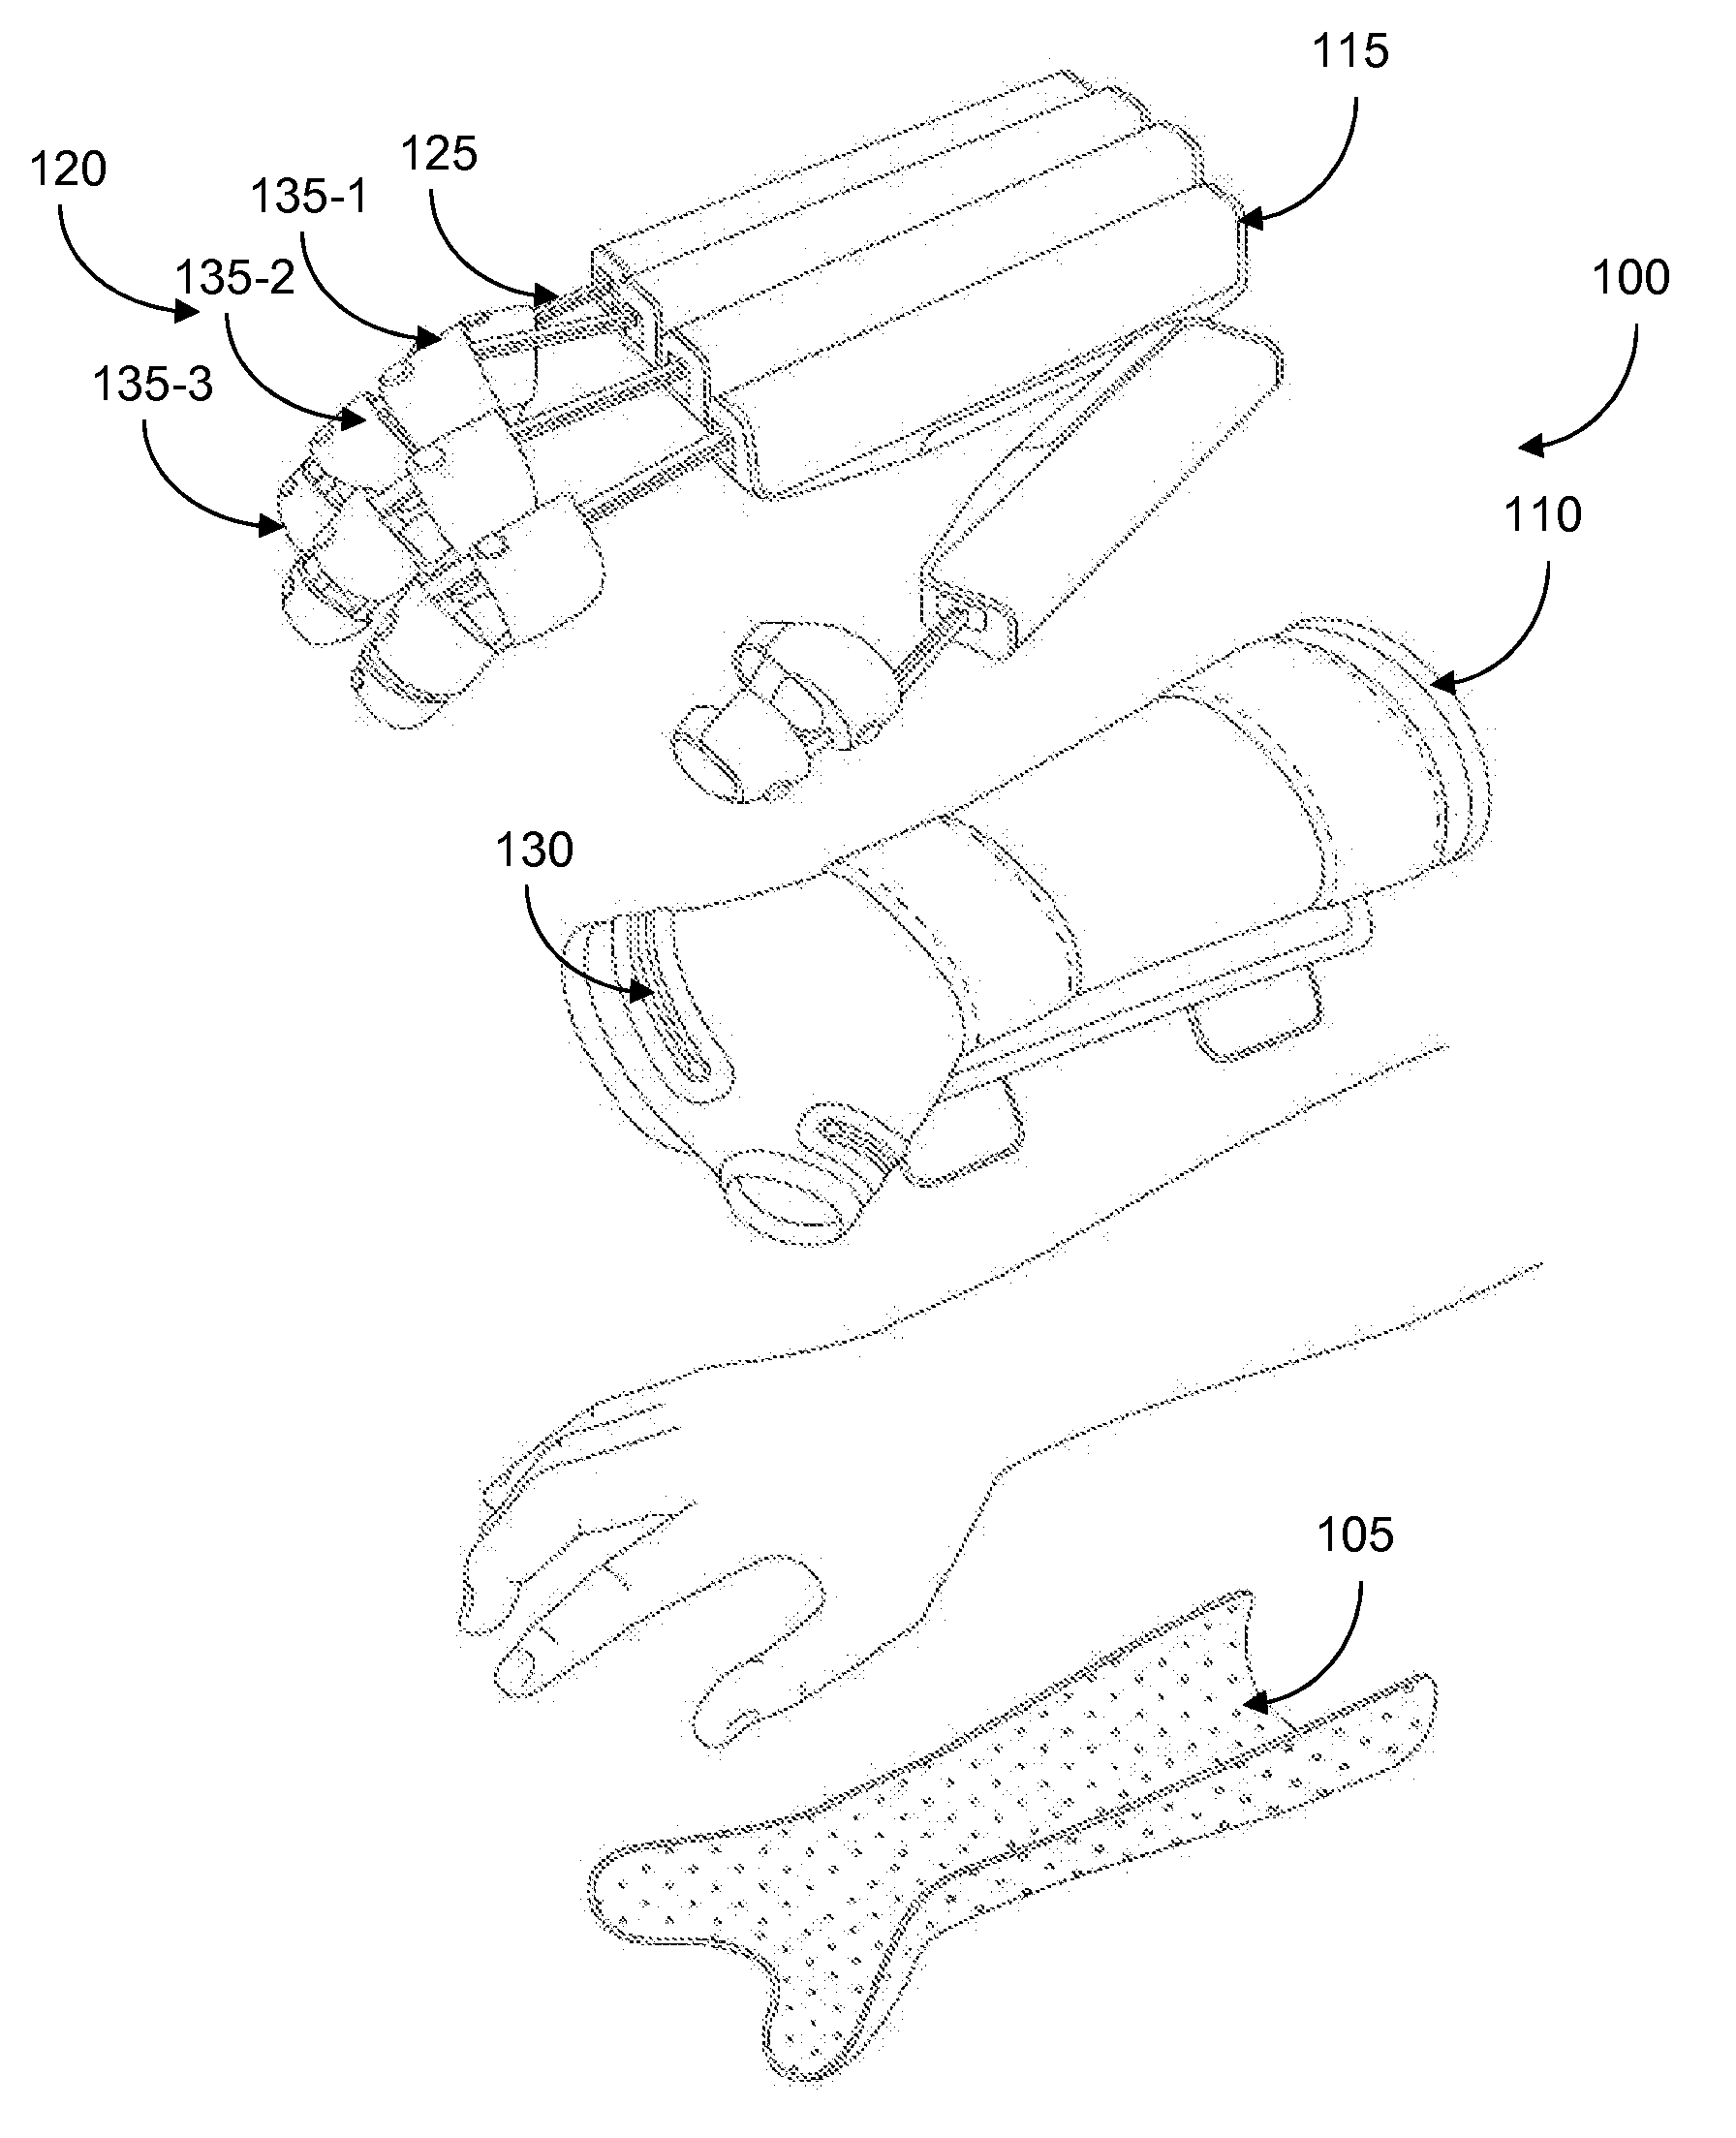 Apparatus for manipulating joints of a limb